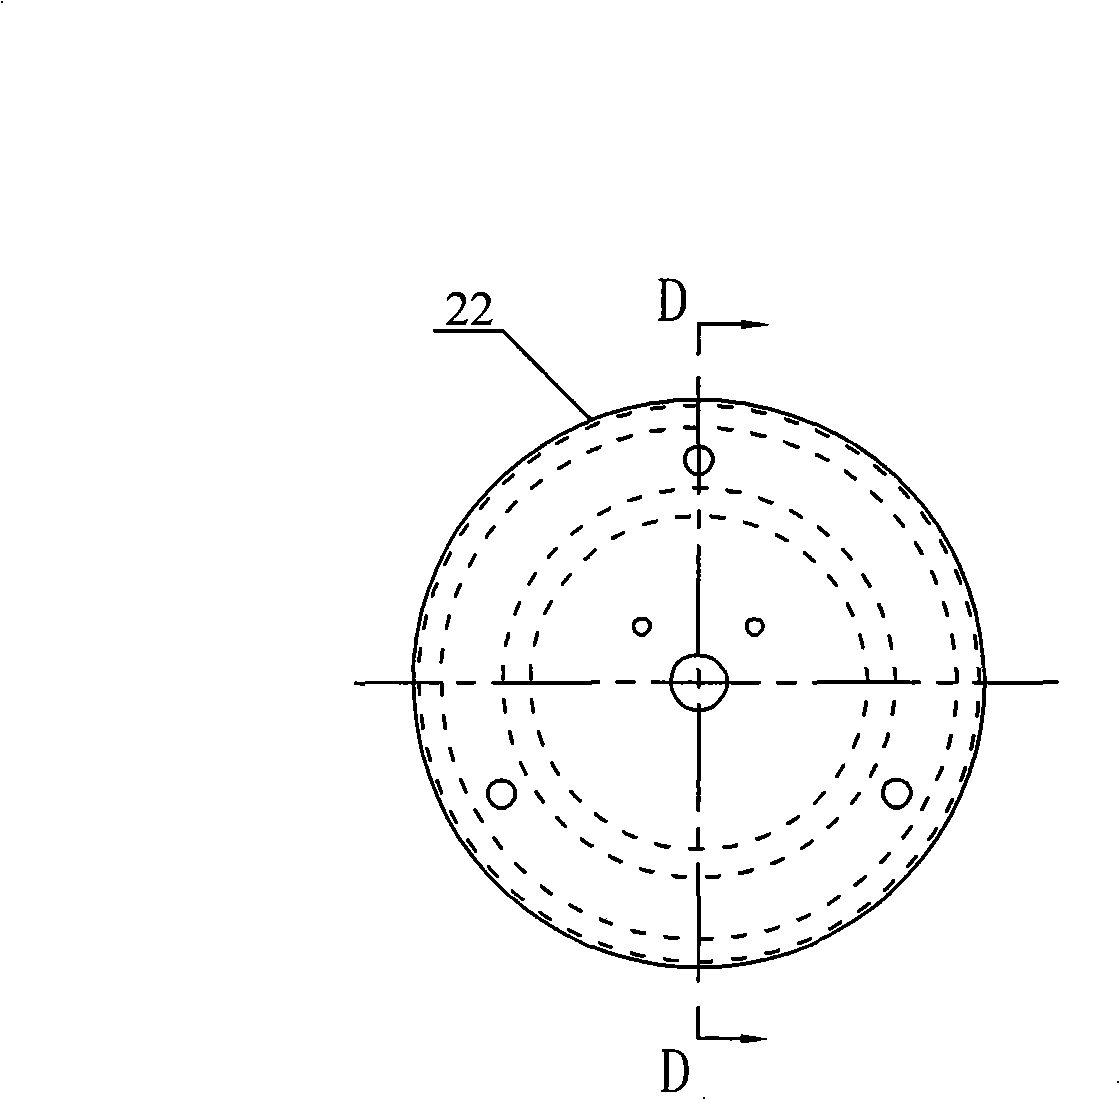 Space fragment and micrometeoroid impact resistant protection mechanism capable of inflating and expanding on rails